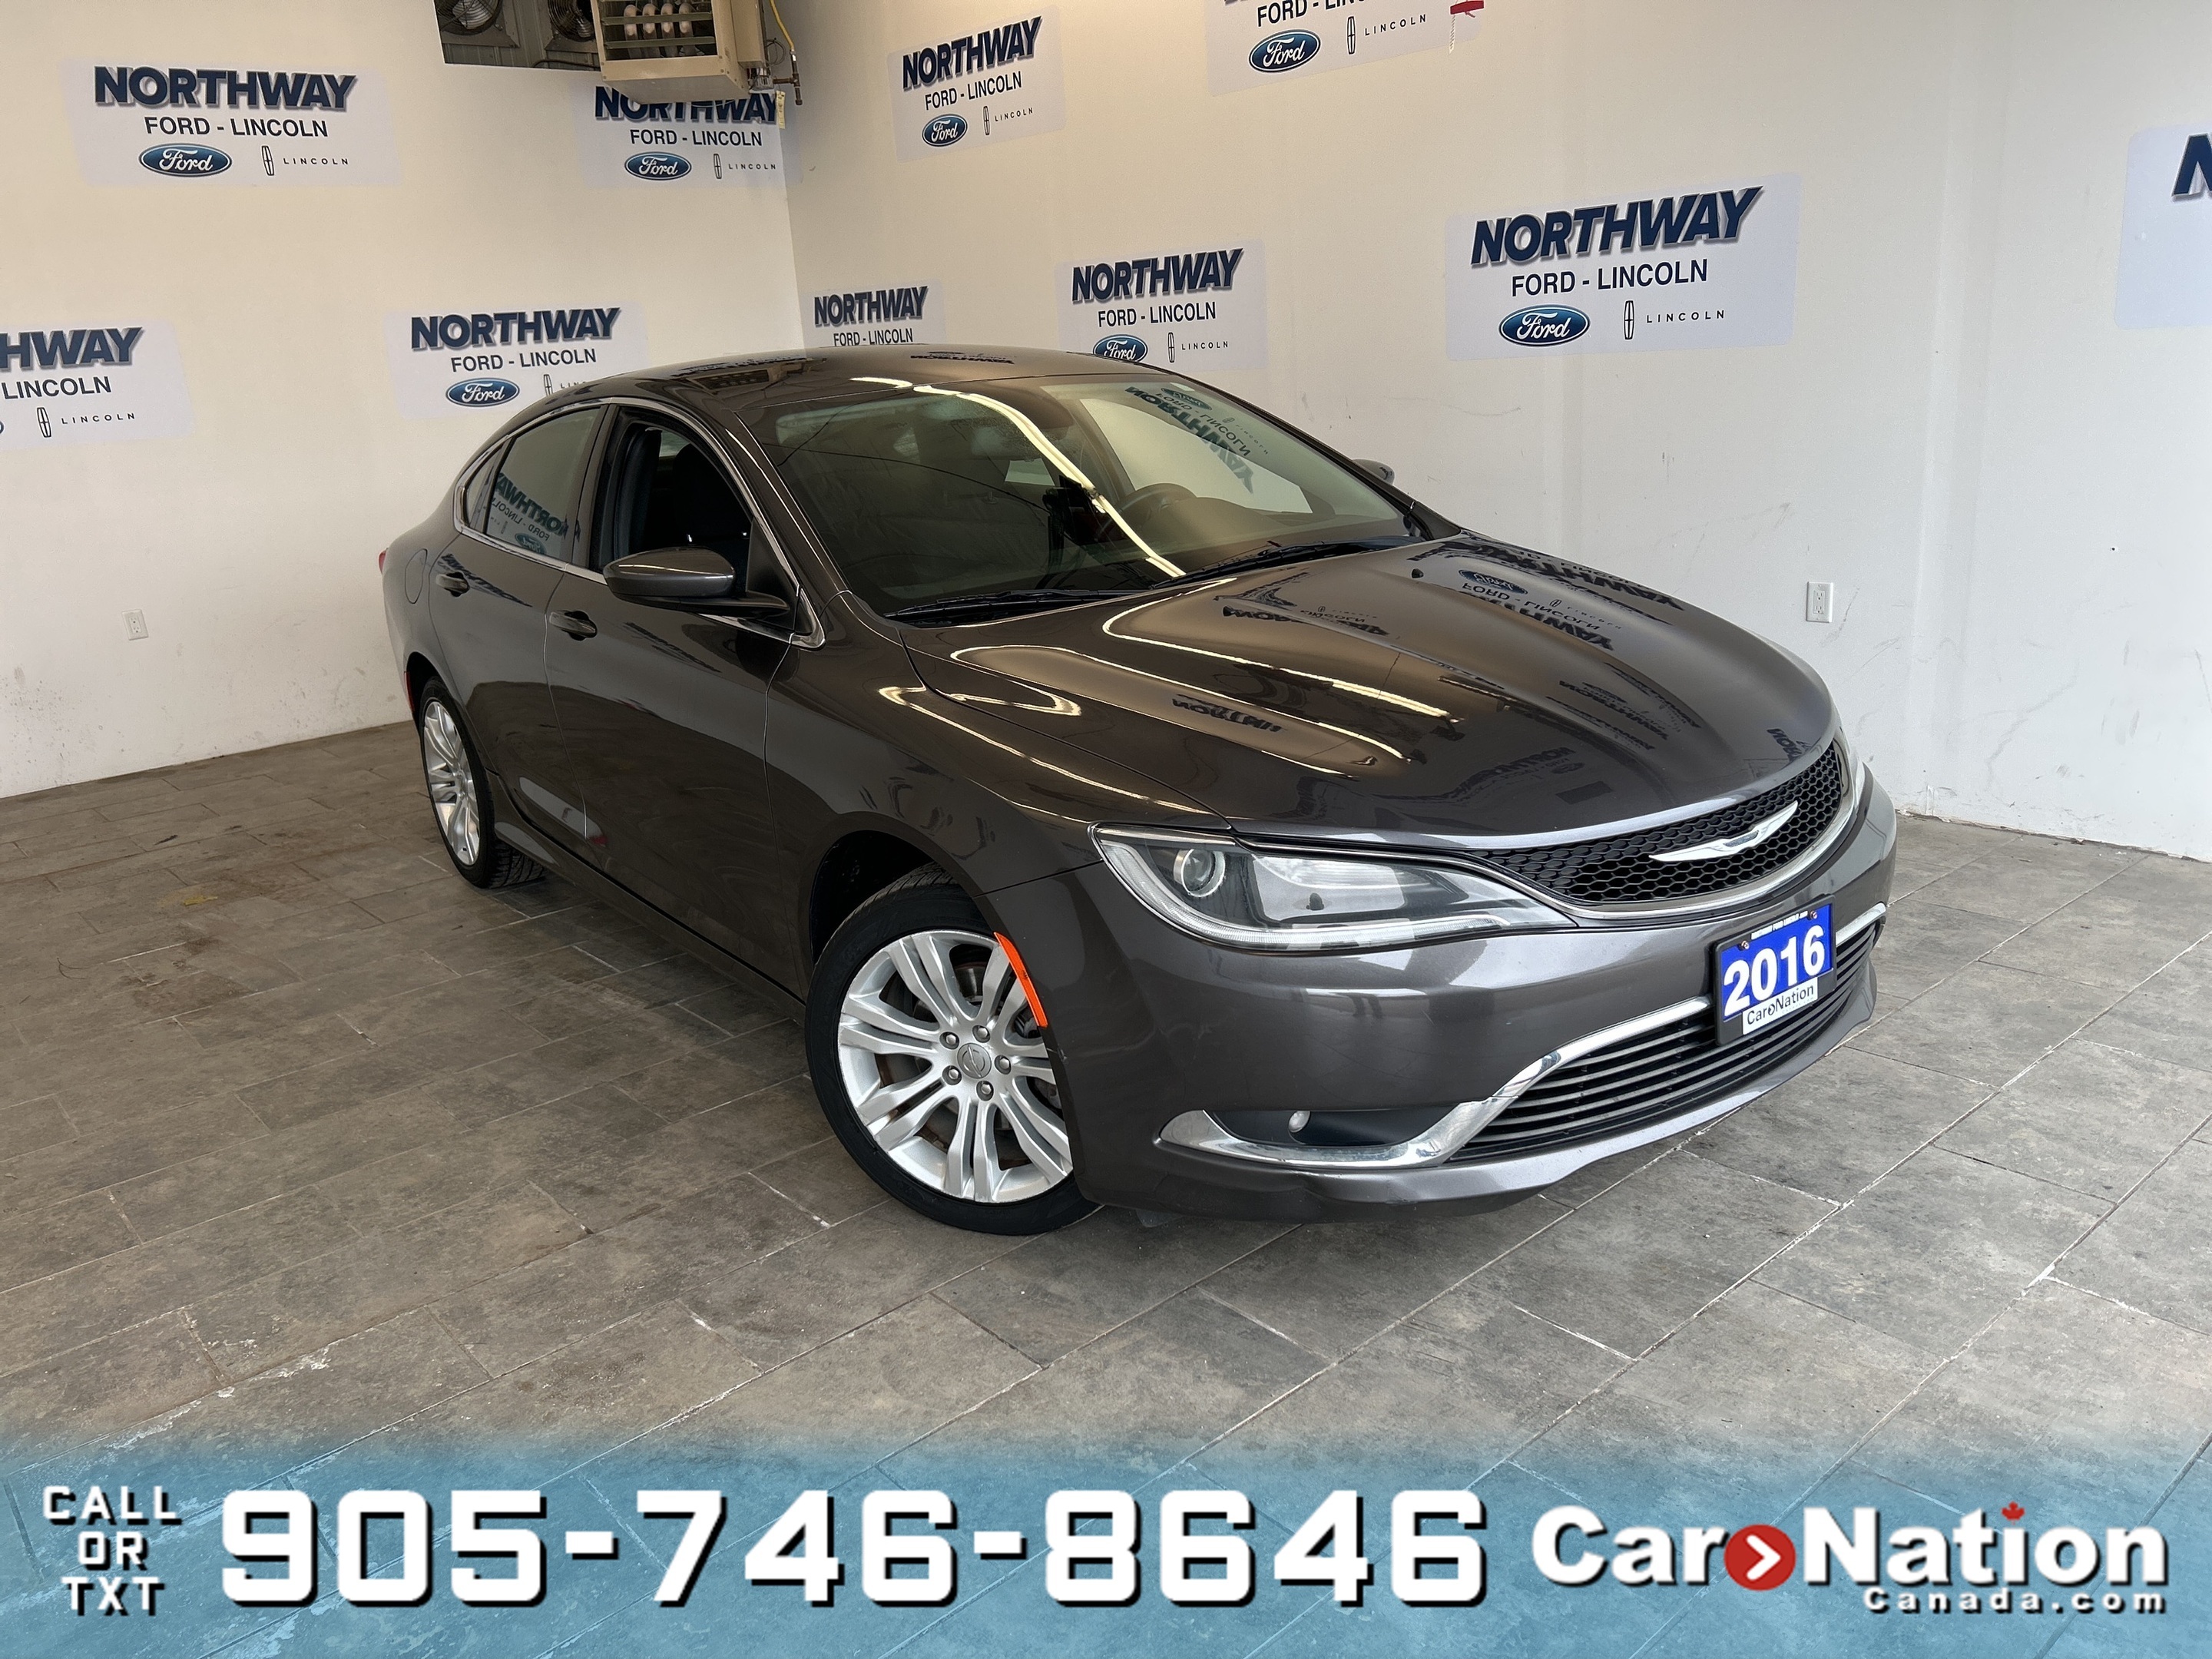 2016 Chrysler 200 LIMITED | 8.4" TOUCHSCREEN | REAR CAM | LOW KMS 